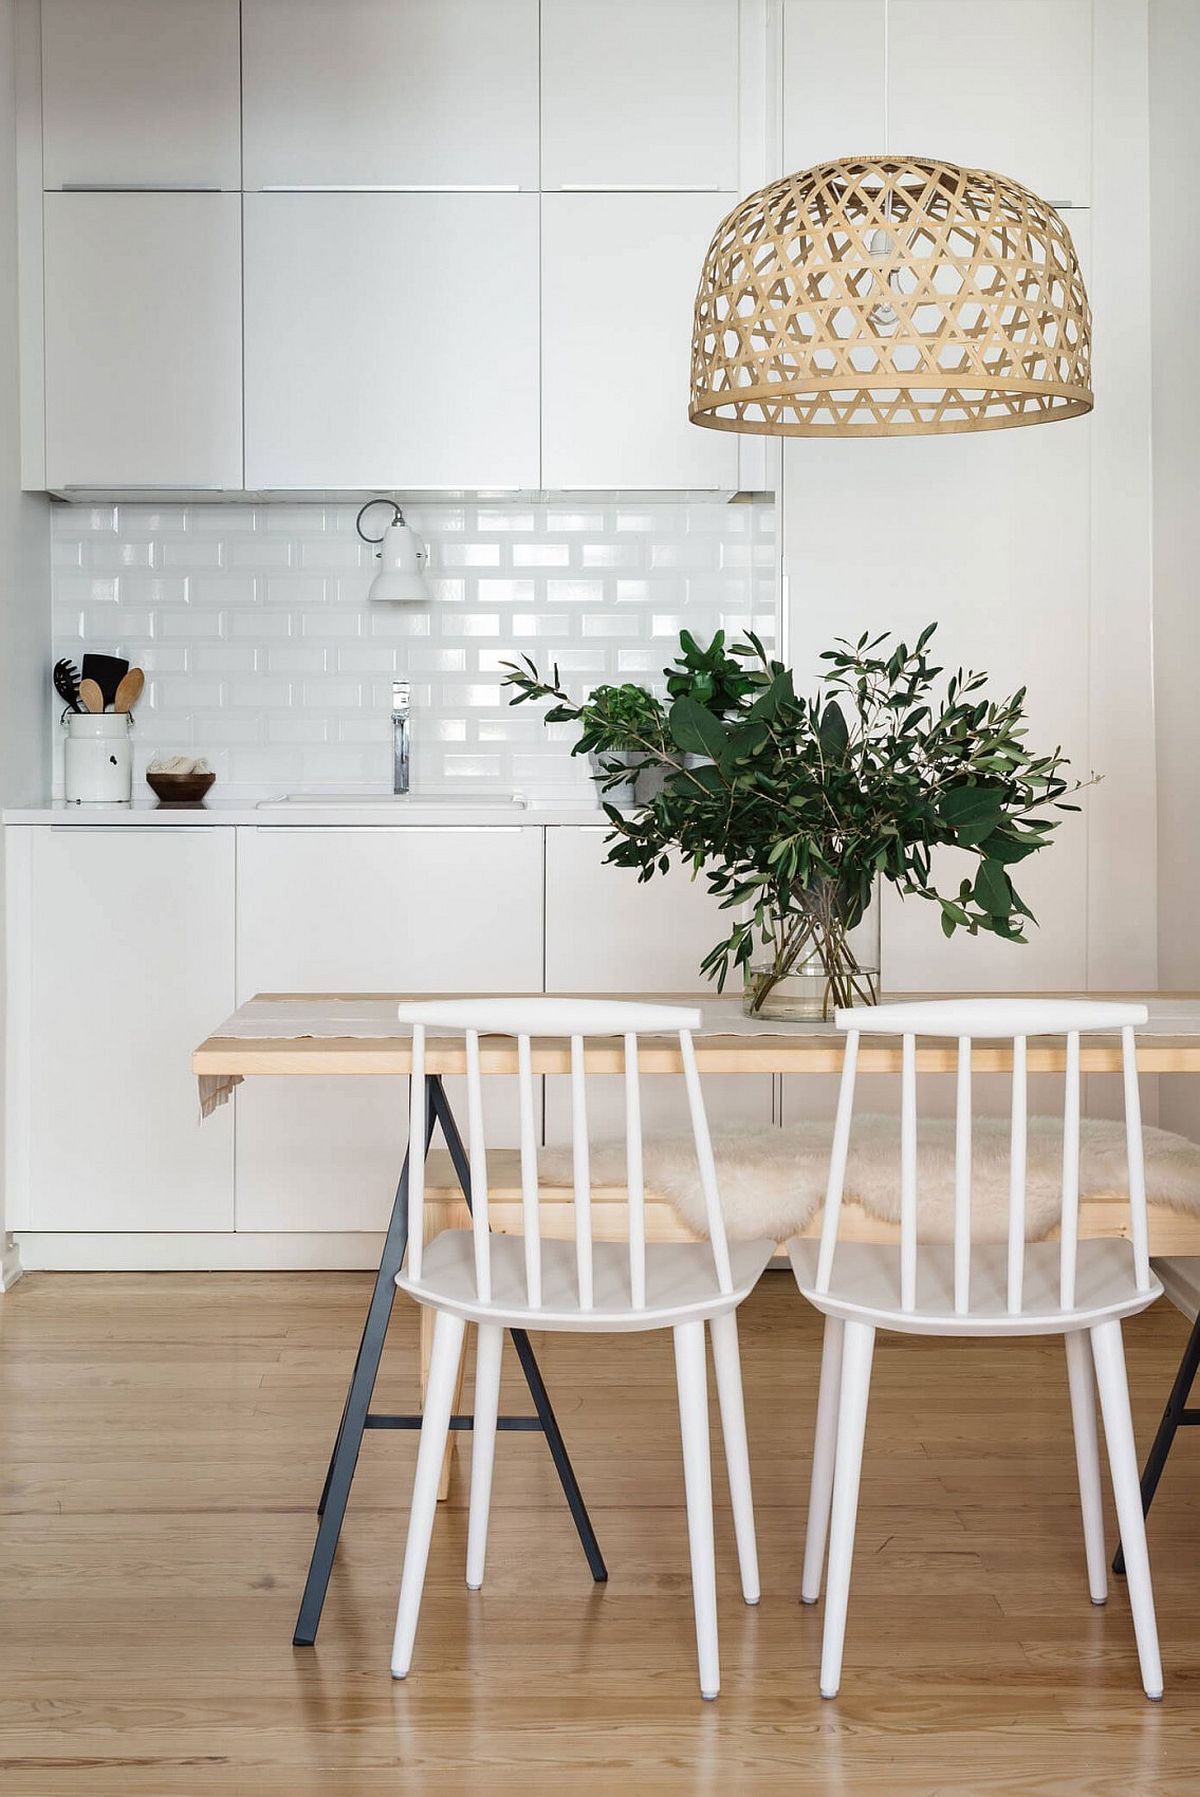 Unique lighting fixture, wooden table and sleek chairs give the kitchen a modern Scandinavian feel